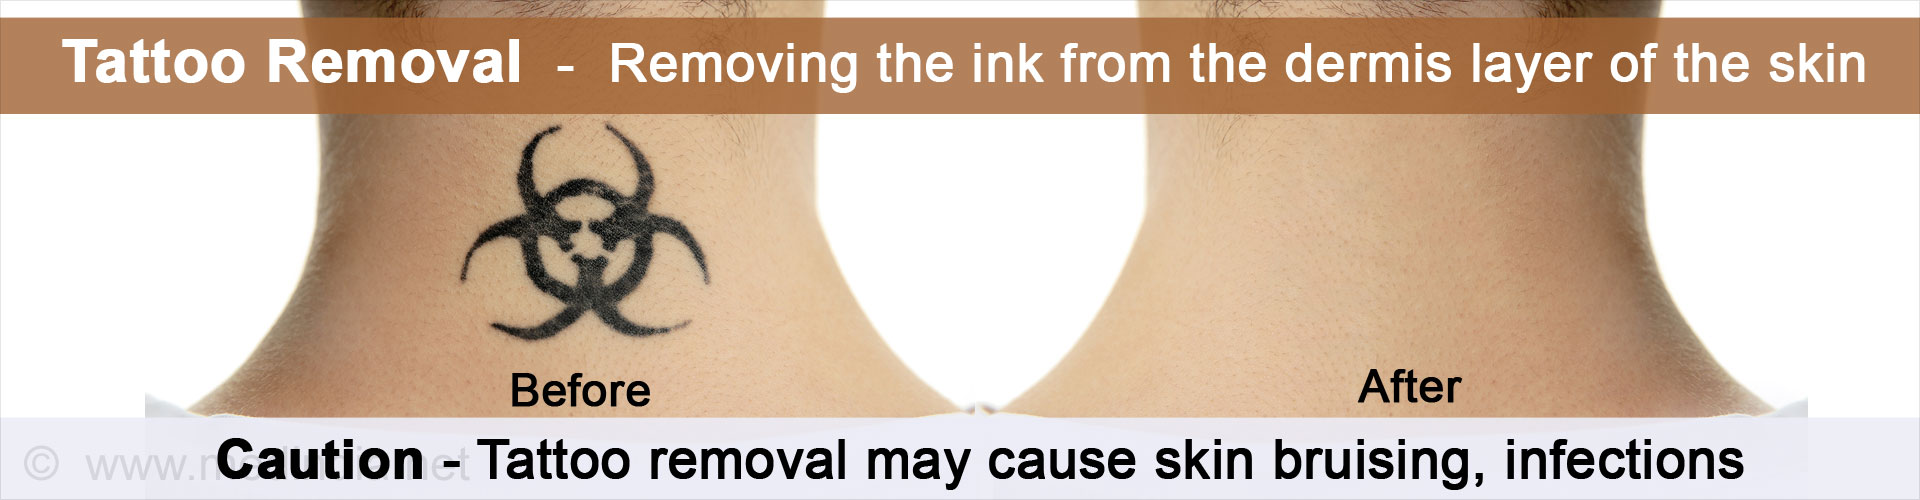 Tattoo Removal - Removing the ink from the dermis layer of the skin

Before After

Caution - Tattoo removal may cause skin bruising, infections